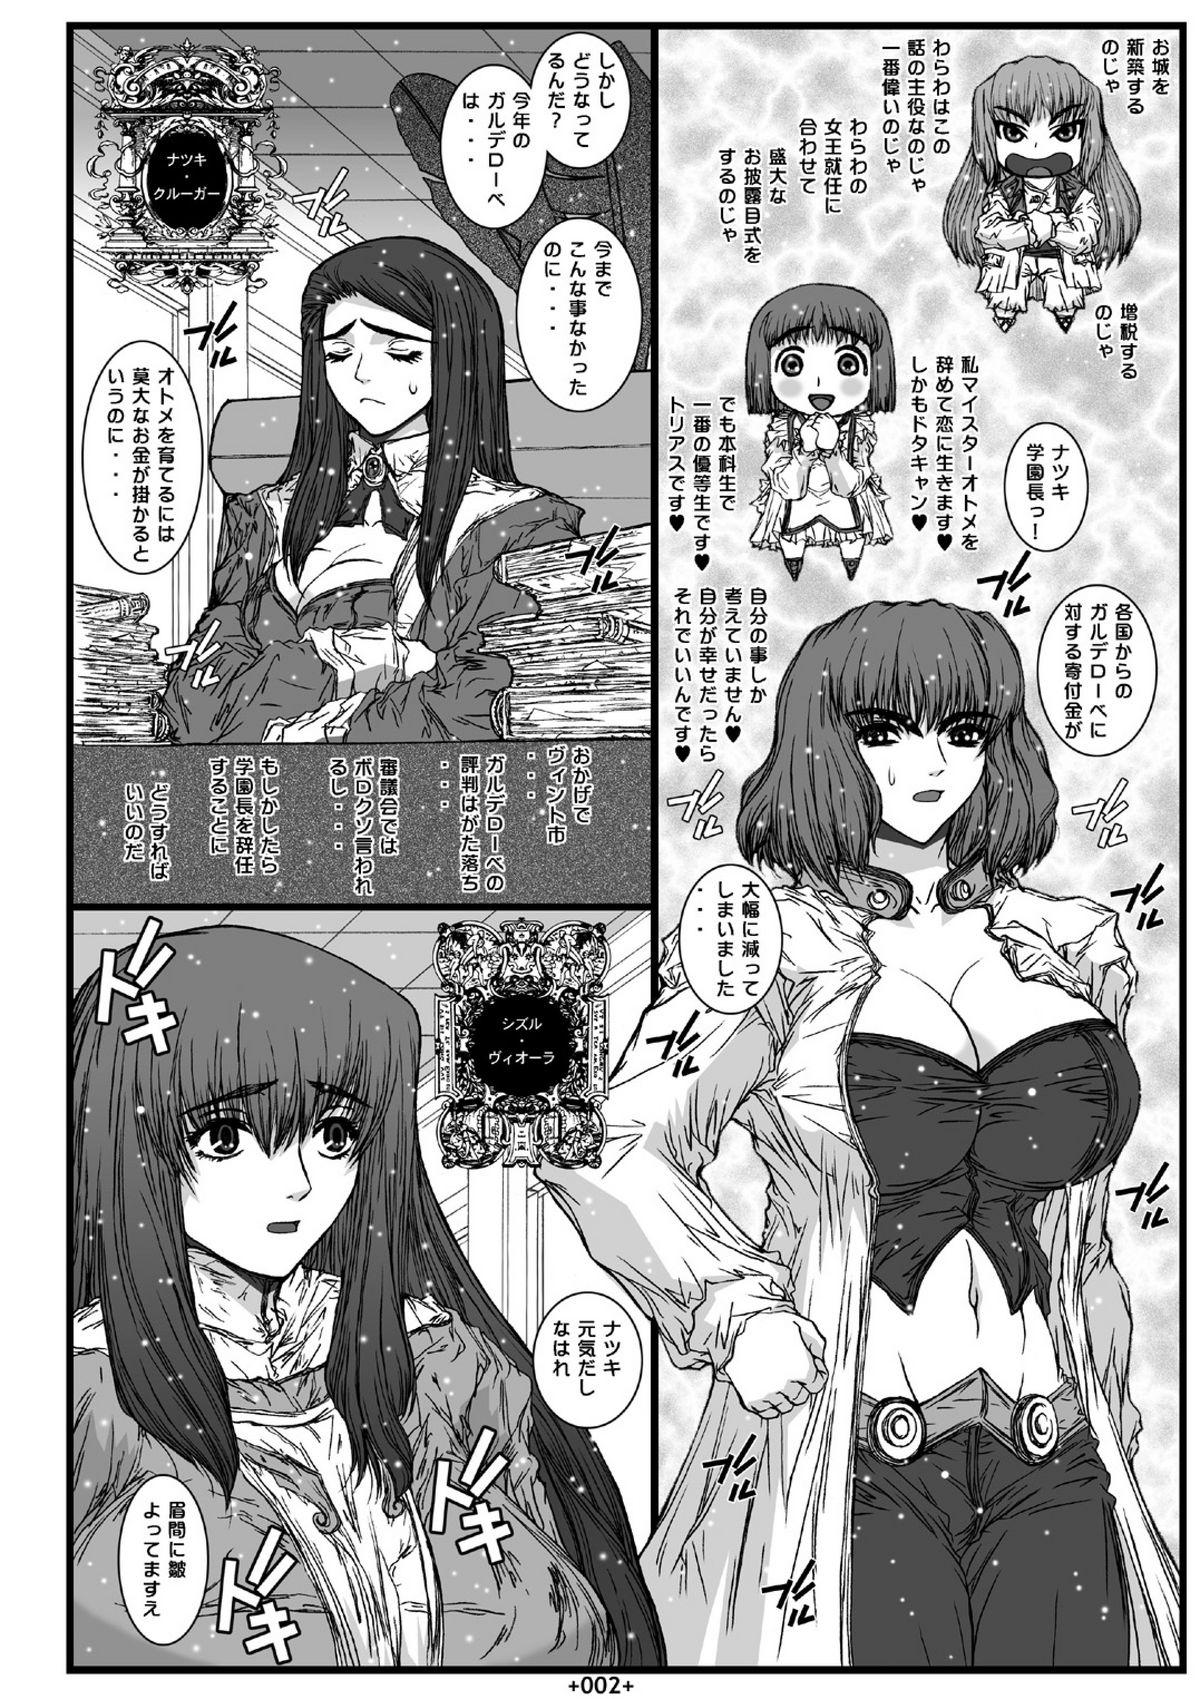 Exgirlfriend Mai-In 2 - Mai-otome Spooning - Page 4